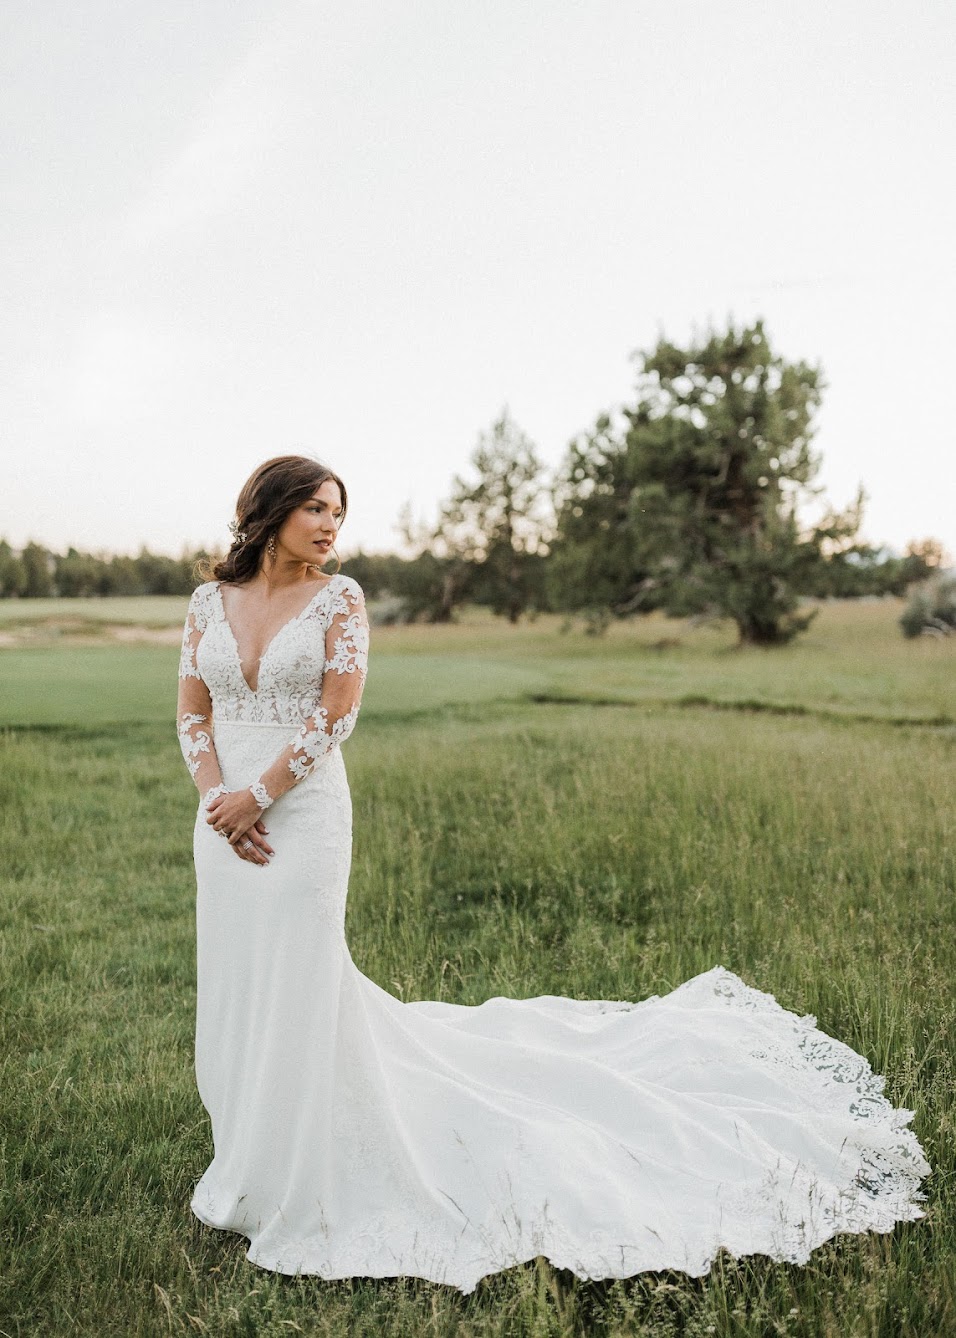 The bride standing in a grassy field with her dress train completely laid out